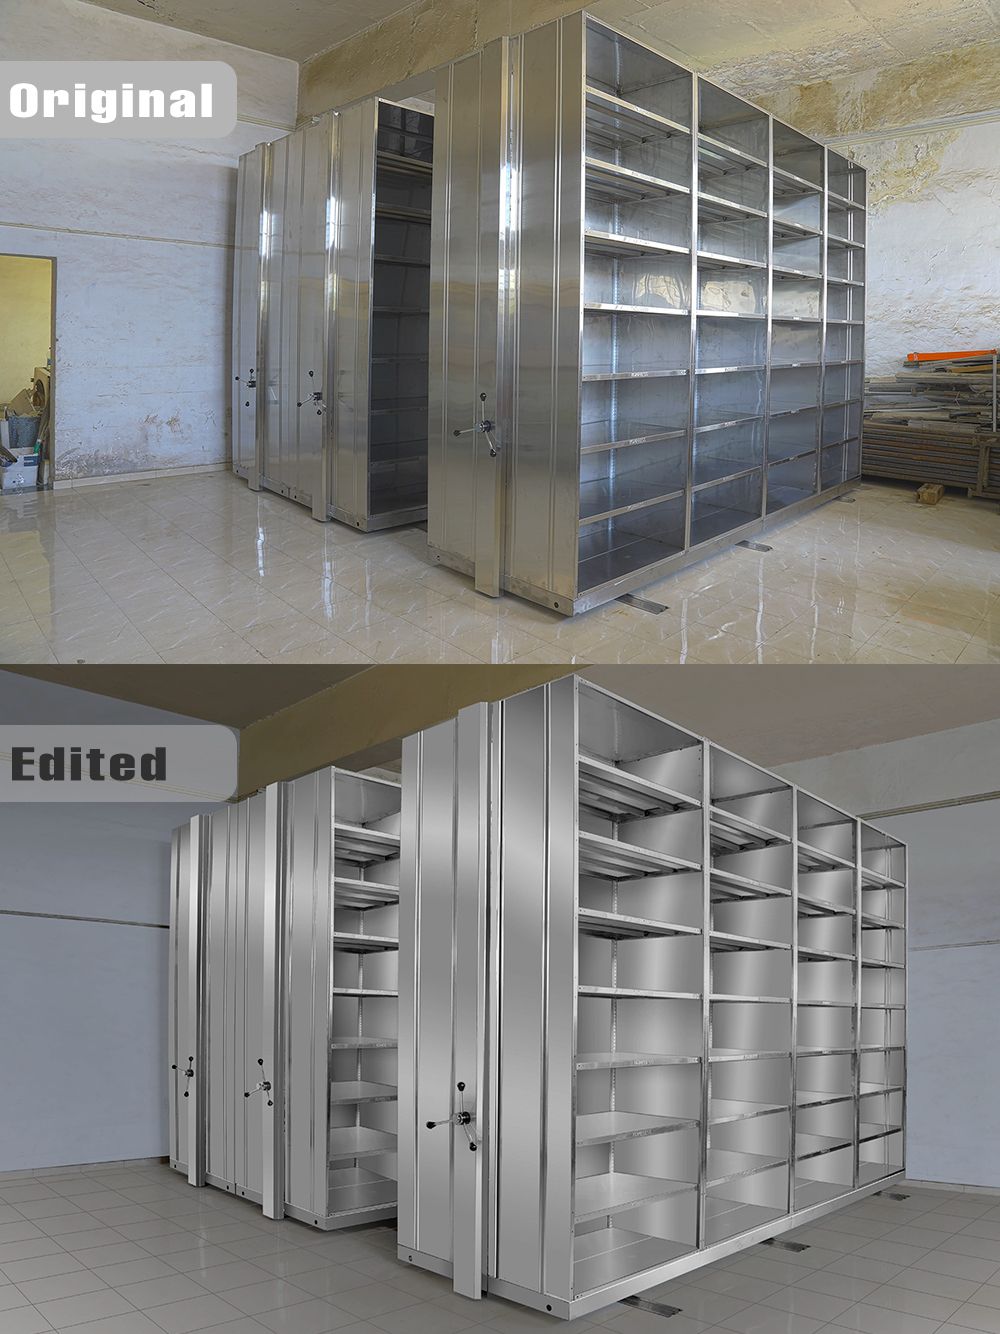 HDR Editing of stainless steel compactor